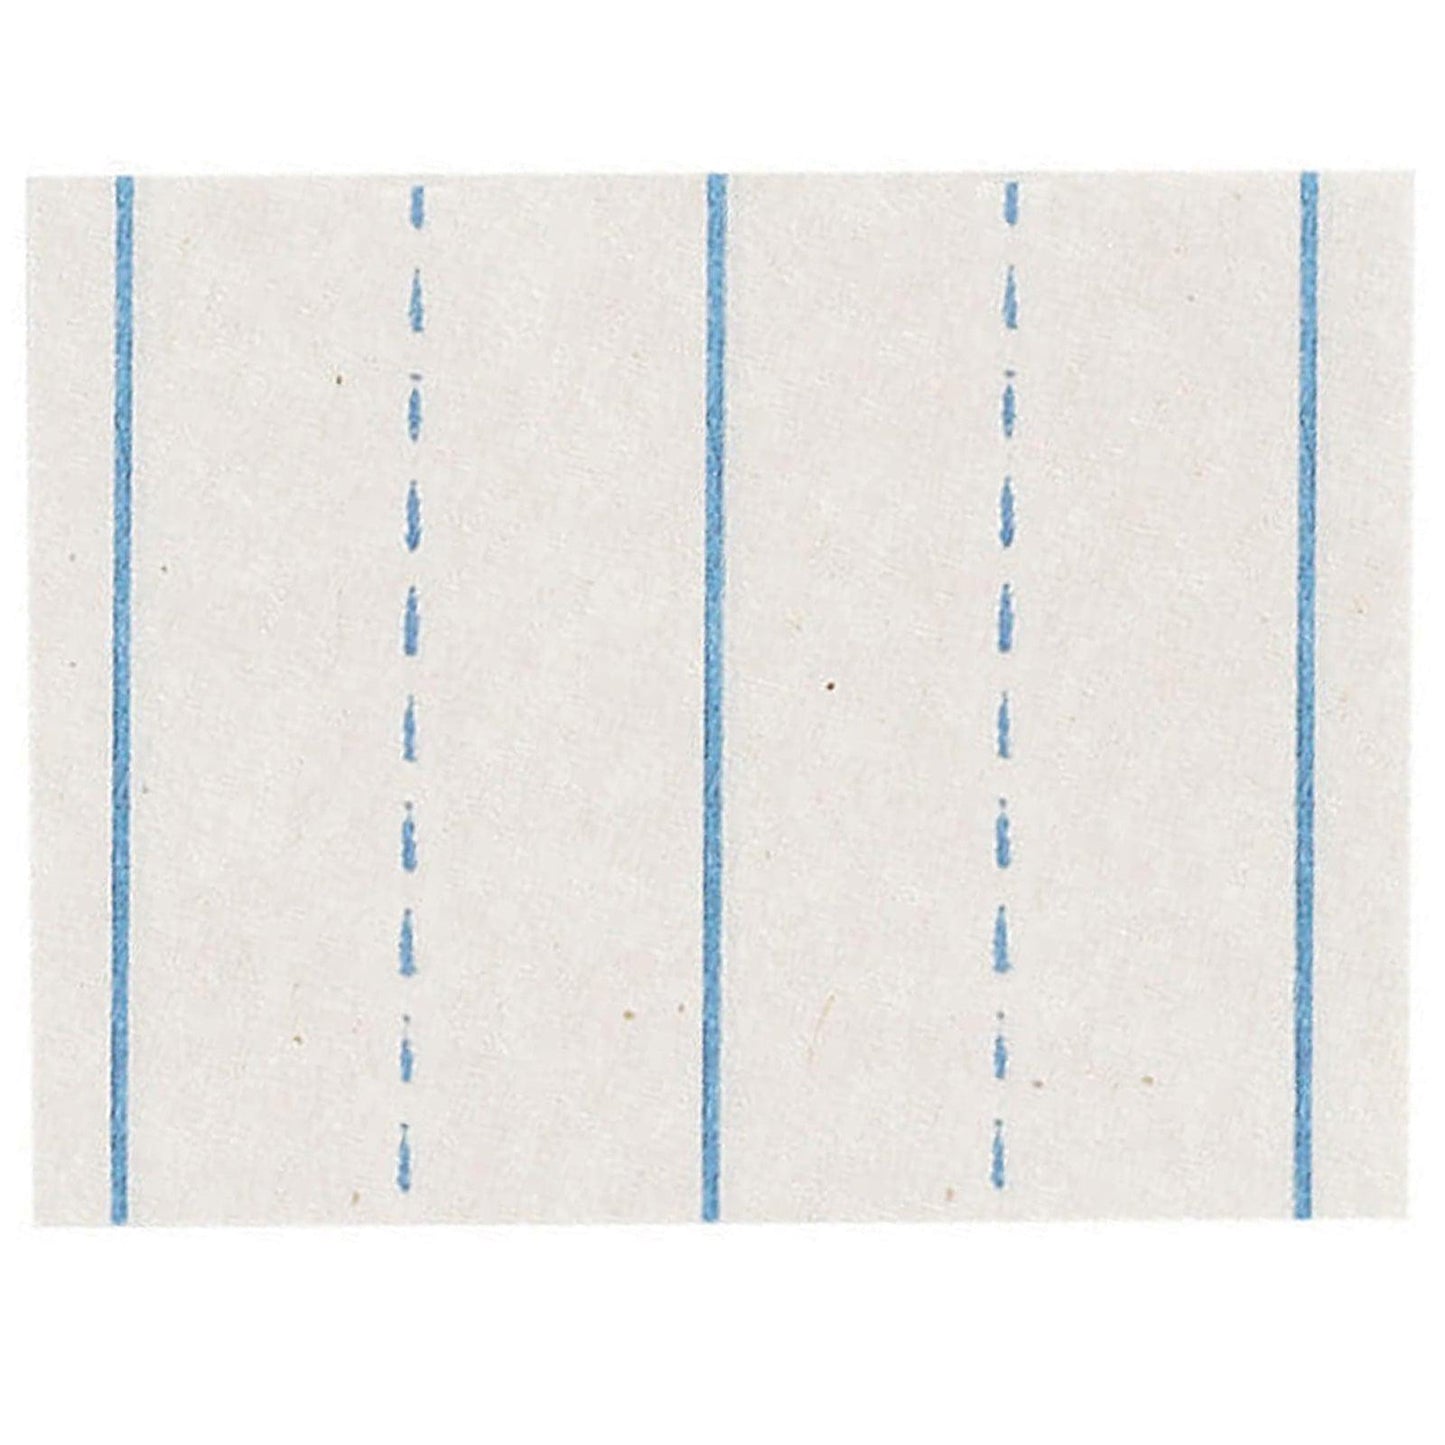 Newsprint Handwriting Paper, Picture Story, 7/8" x 7/16" Ruled Long, 18" x 12", 500 Sheets - Loomini